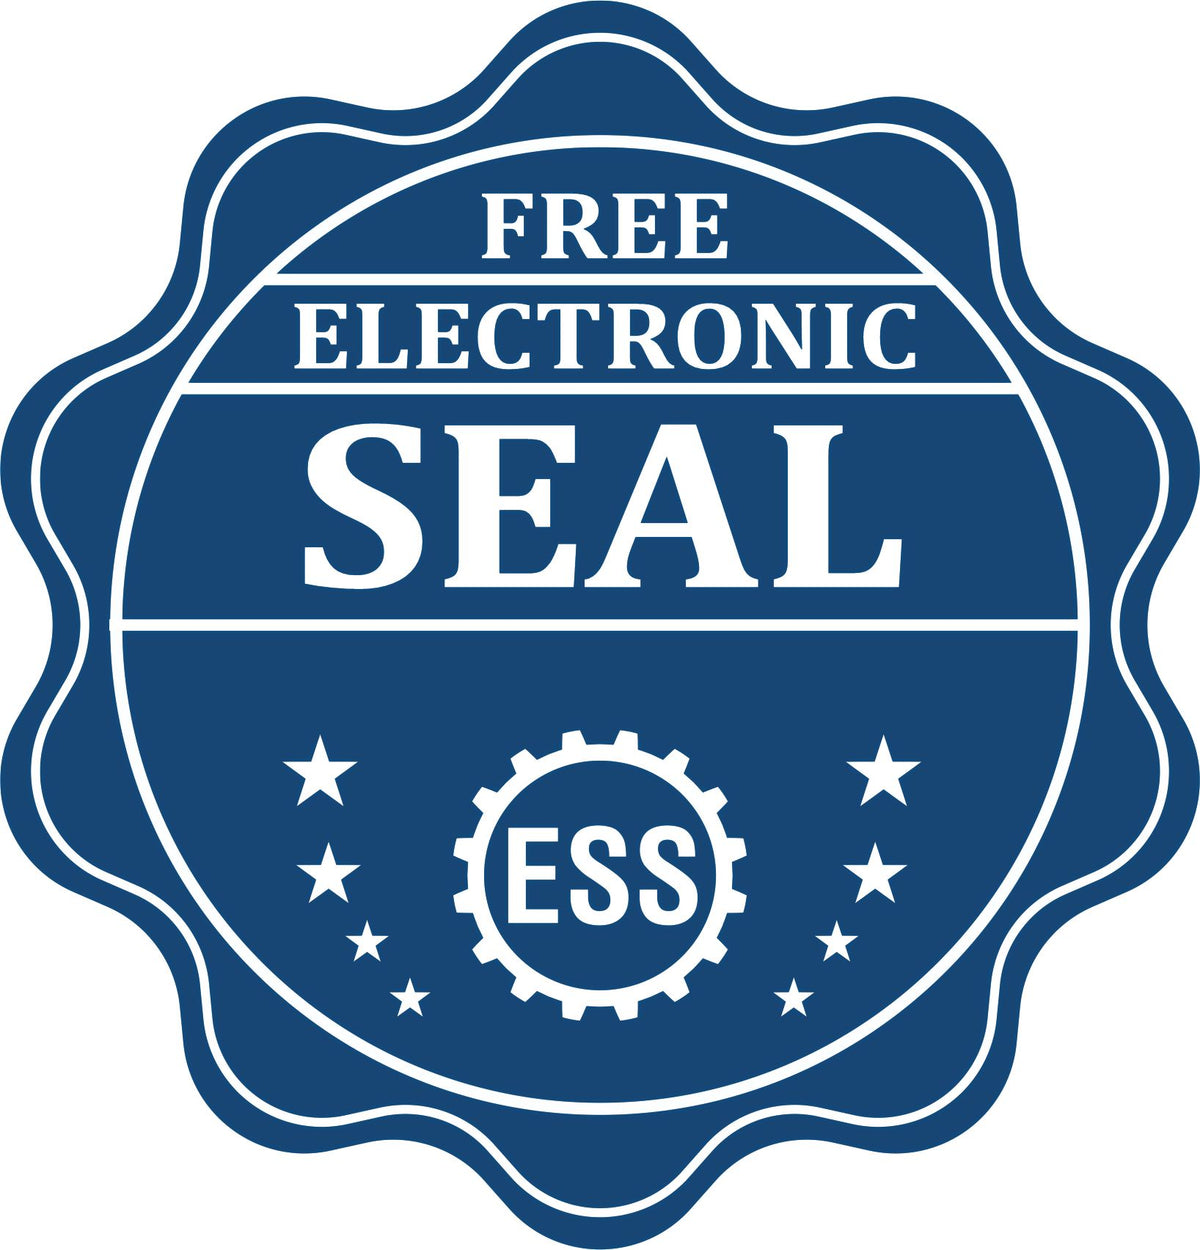 A badge showing a free electronic seal for the Handheld Arkansas Professional Engineer Embosser with stars and the ESS gear on the emblem.